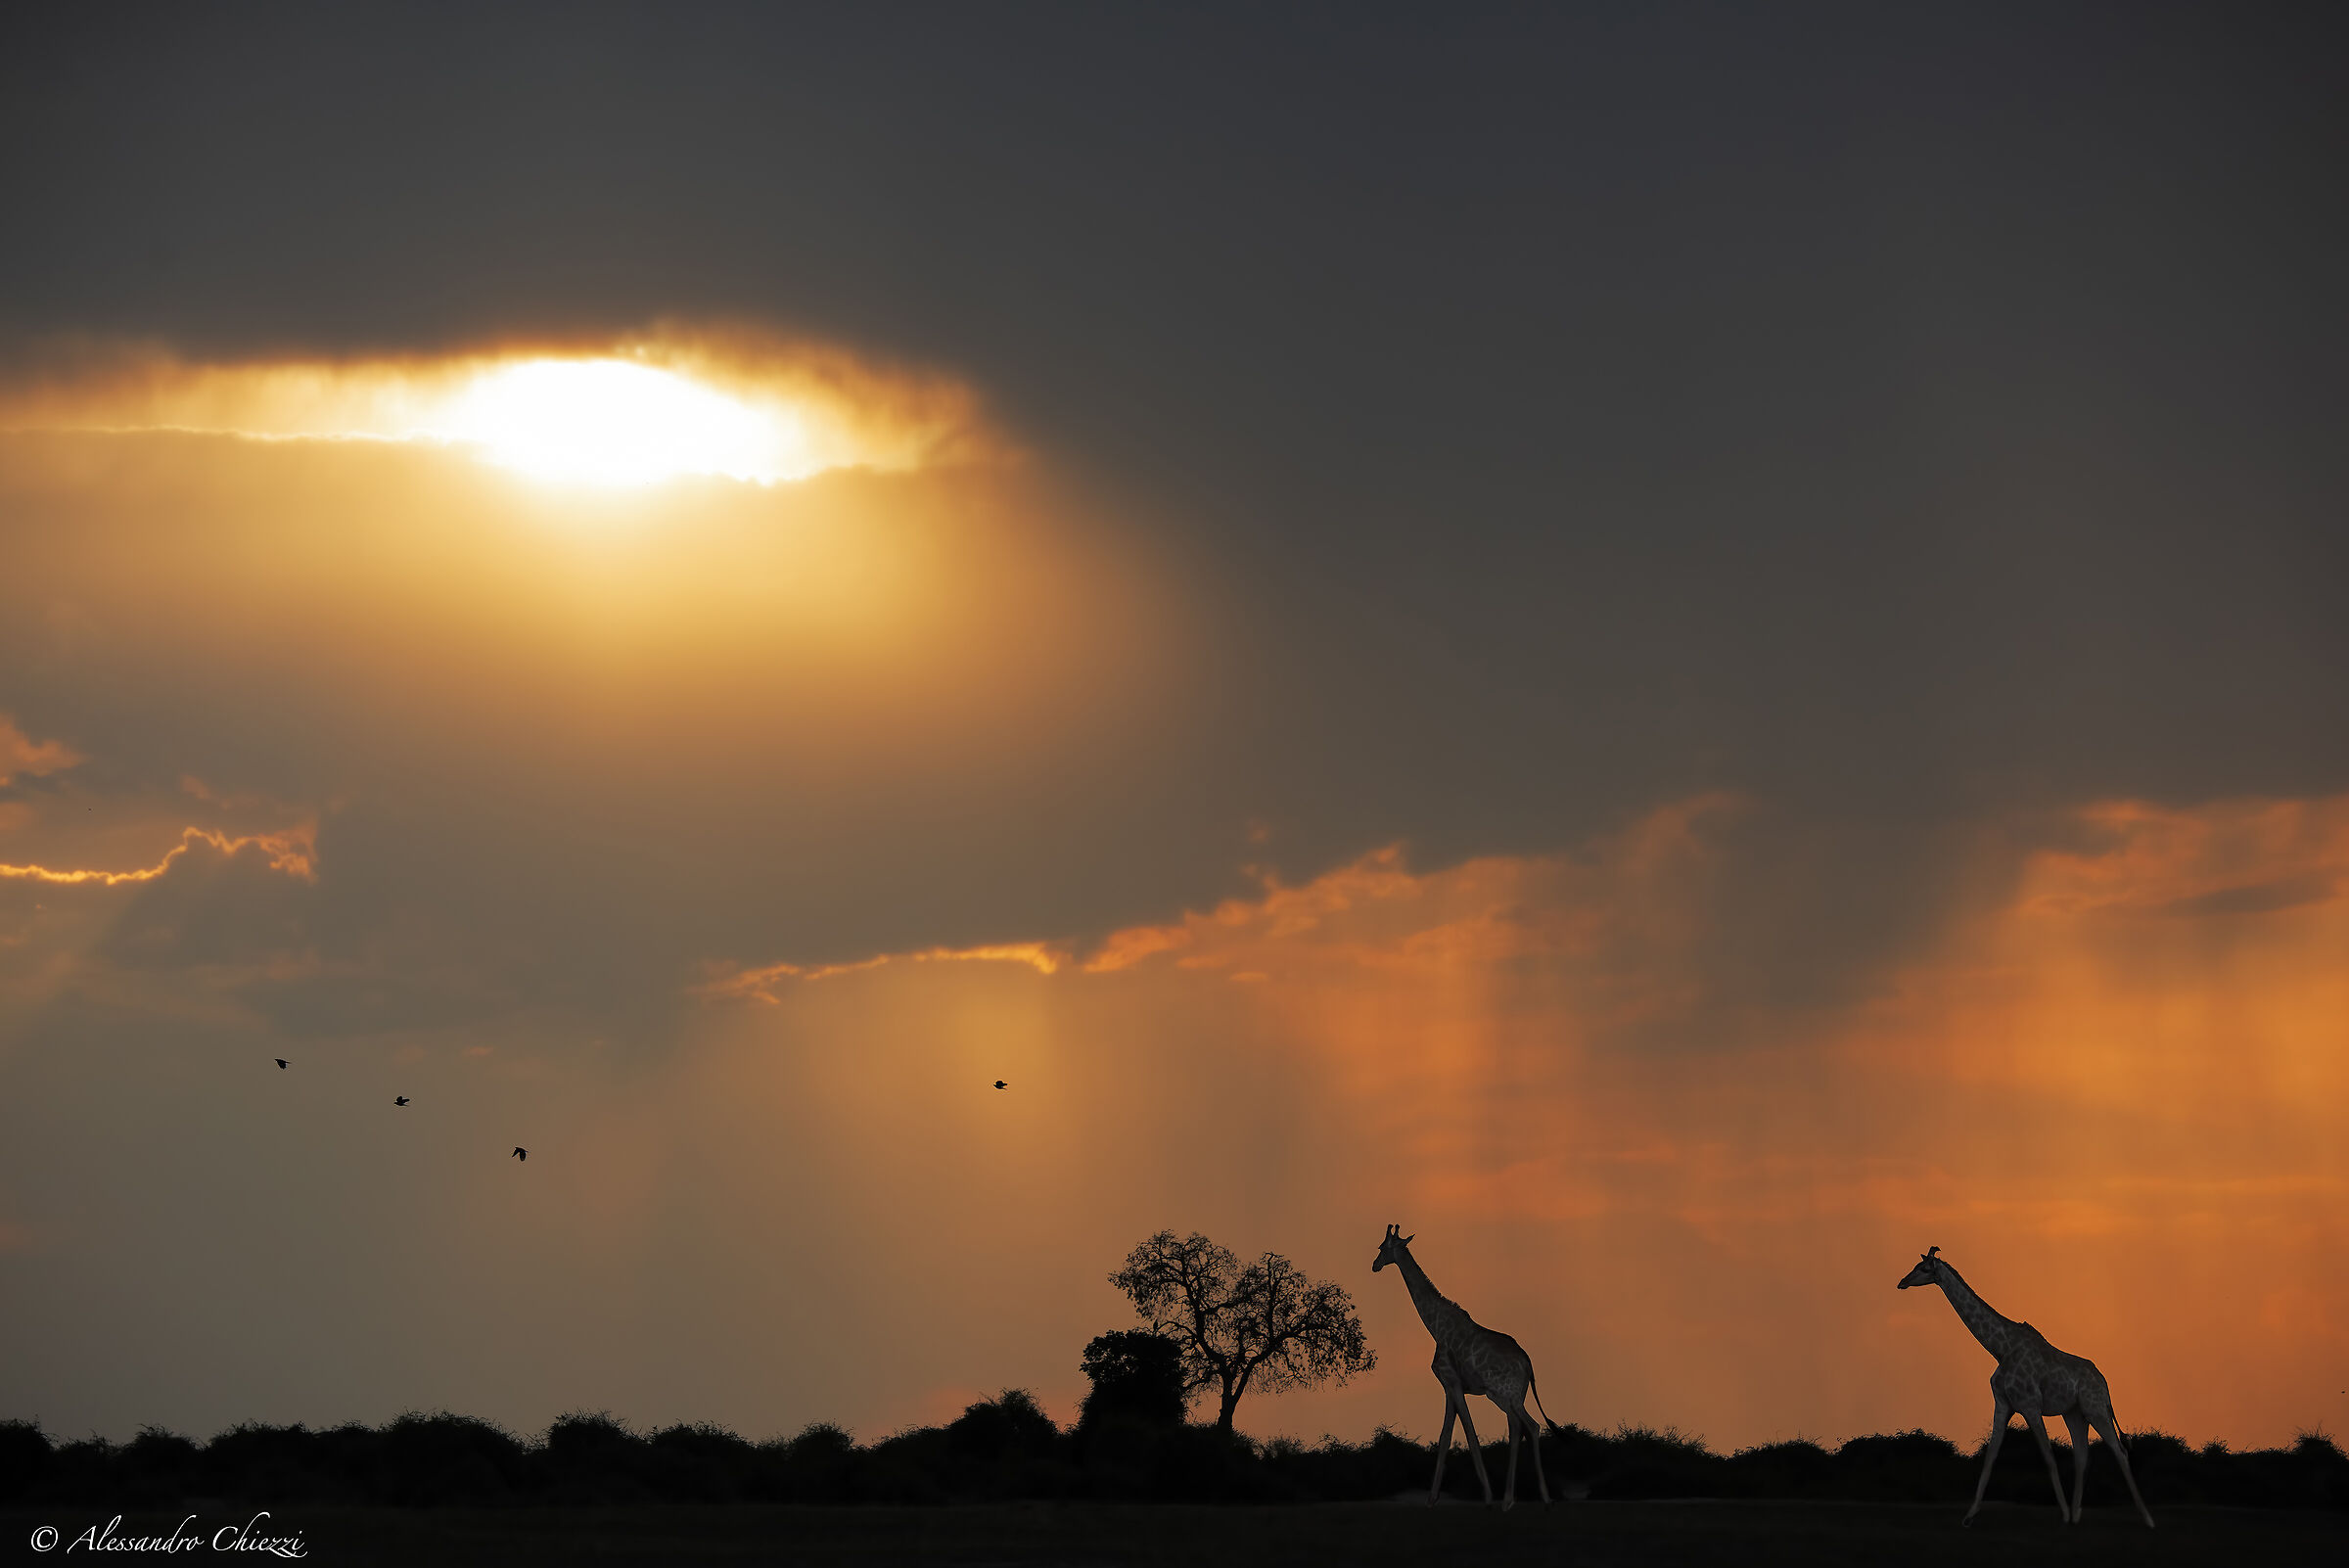 Giraffes and the thunderstorm...